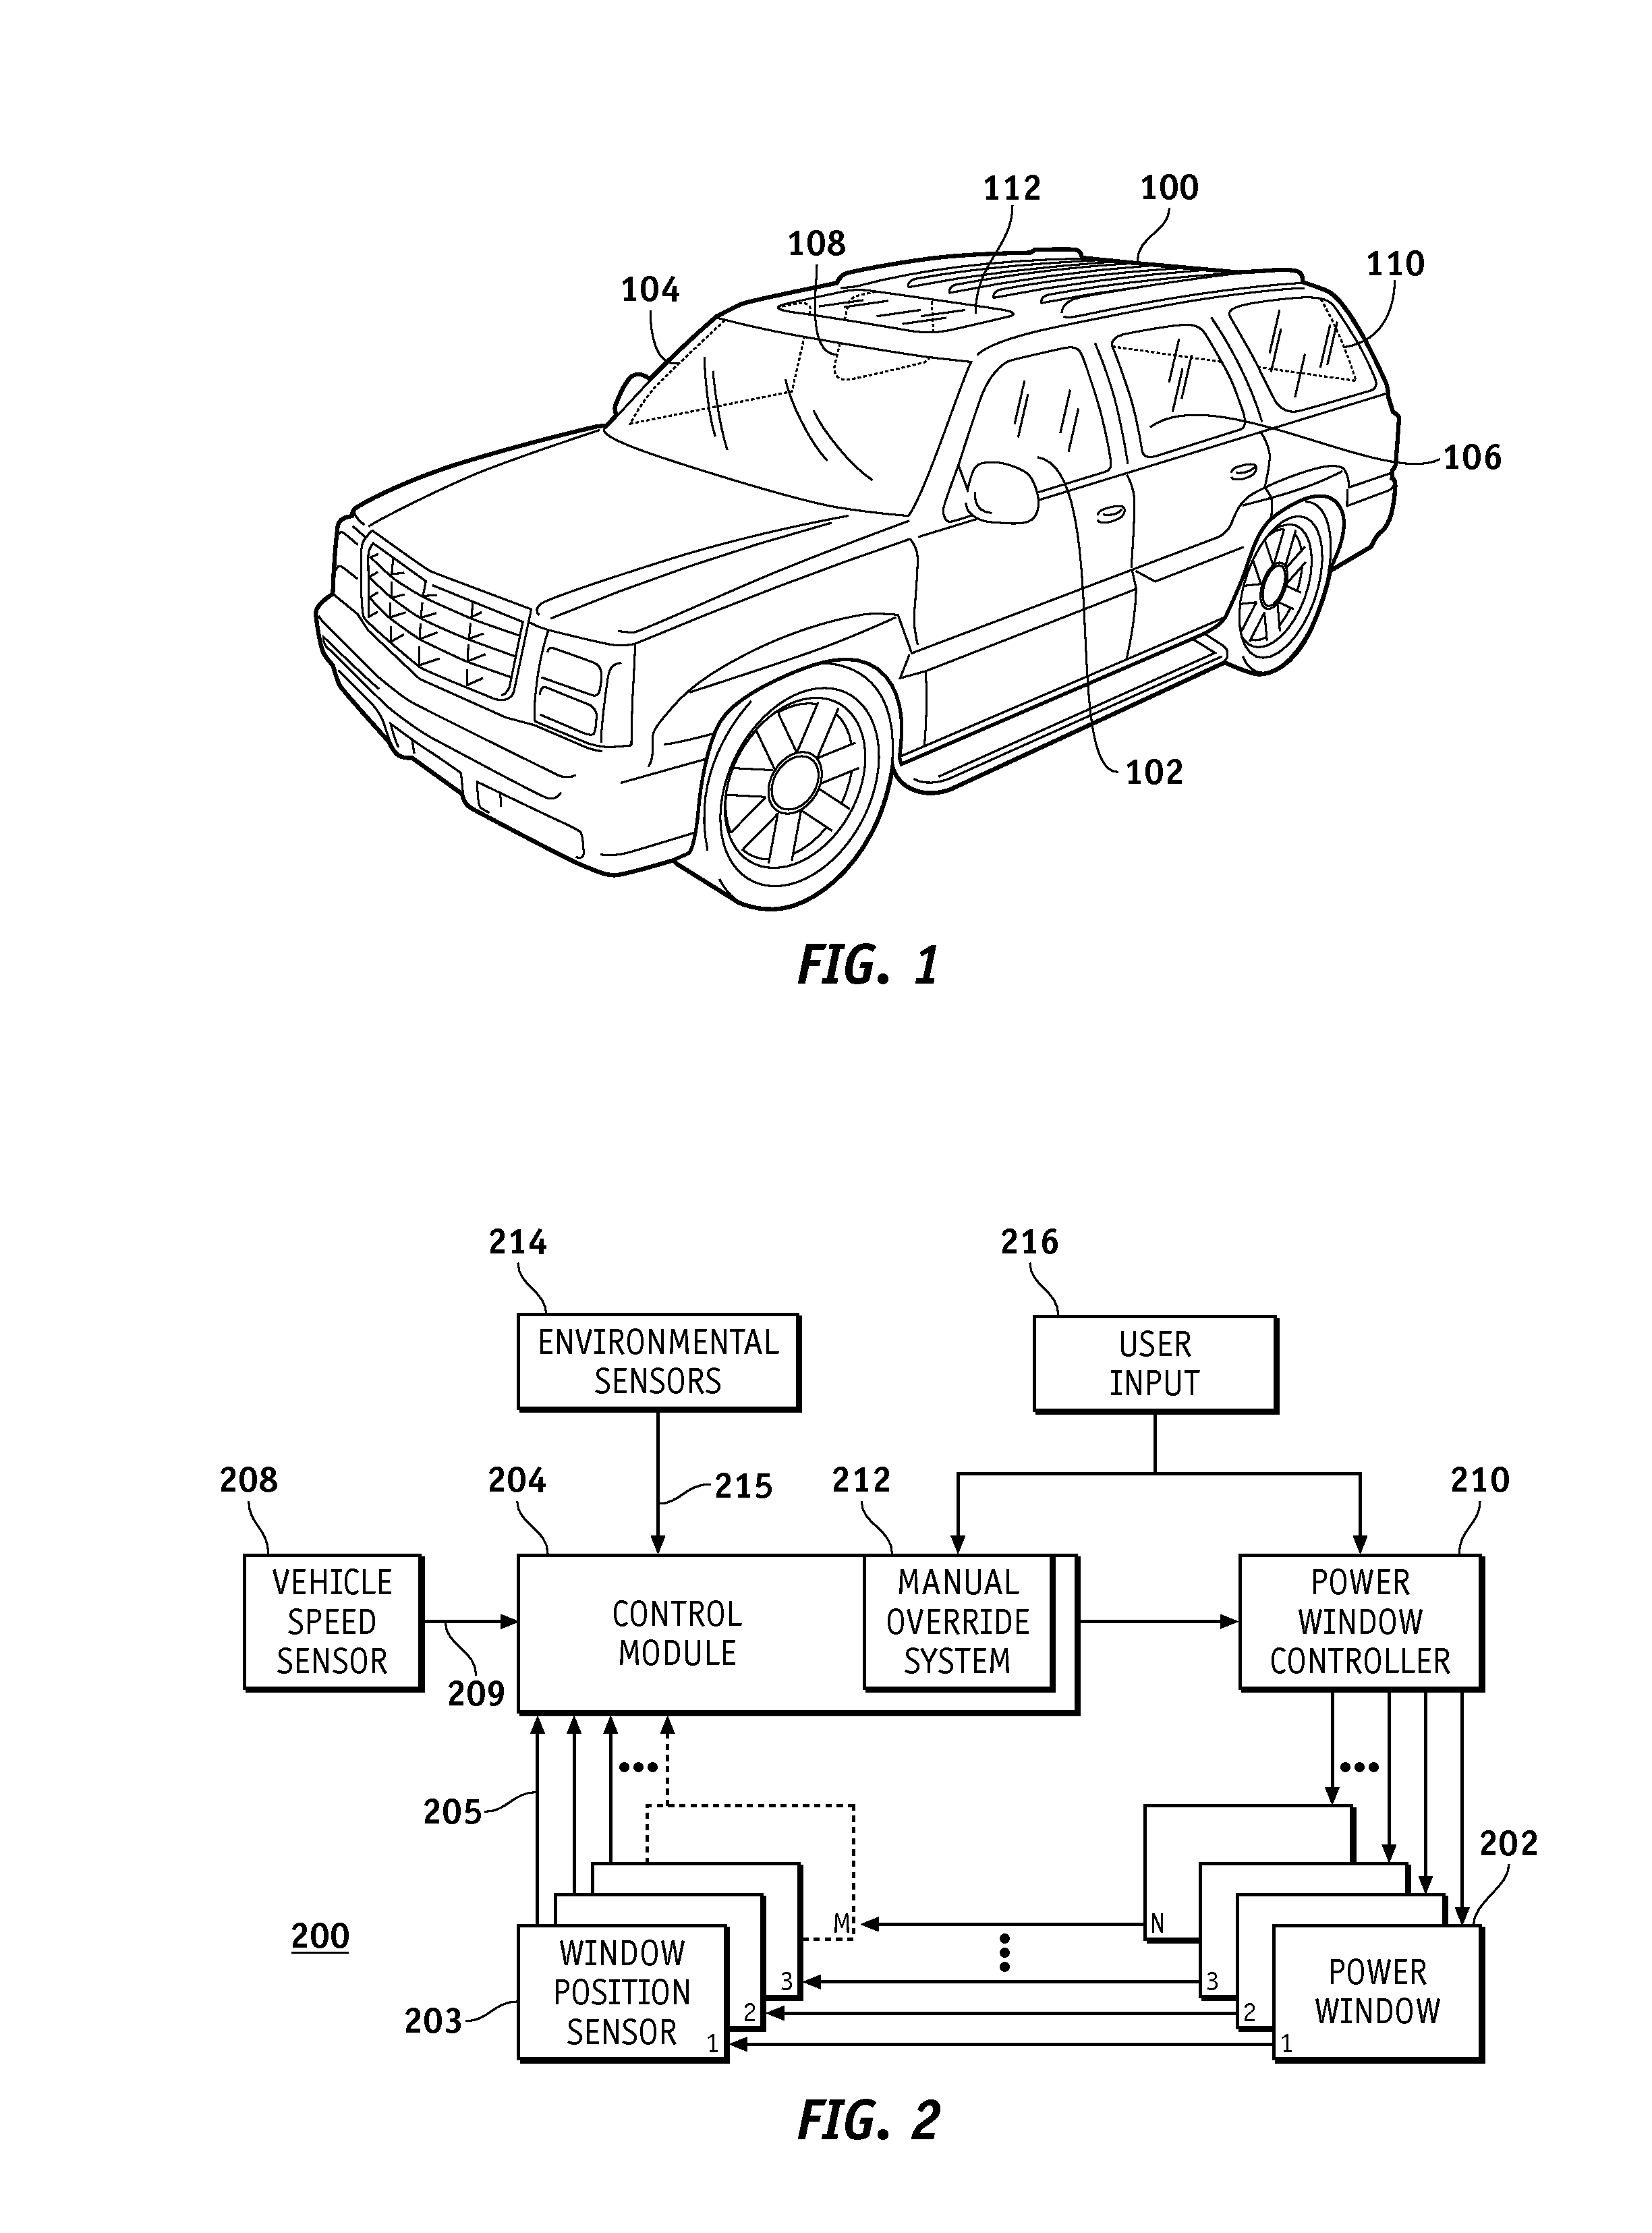 Automatic window repositioning to relieve vehicle passenger cabin wind pressure pulsation